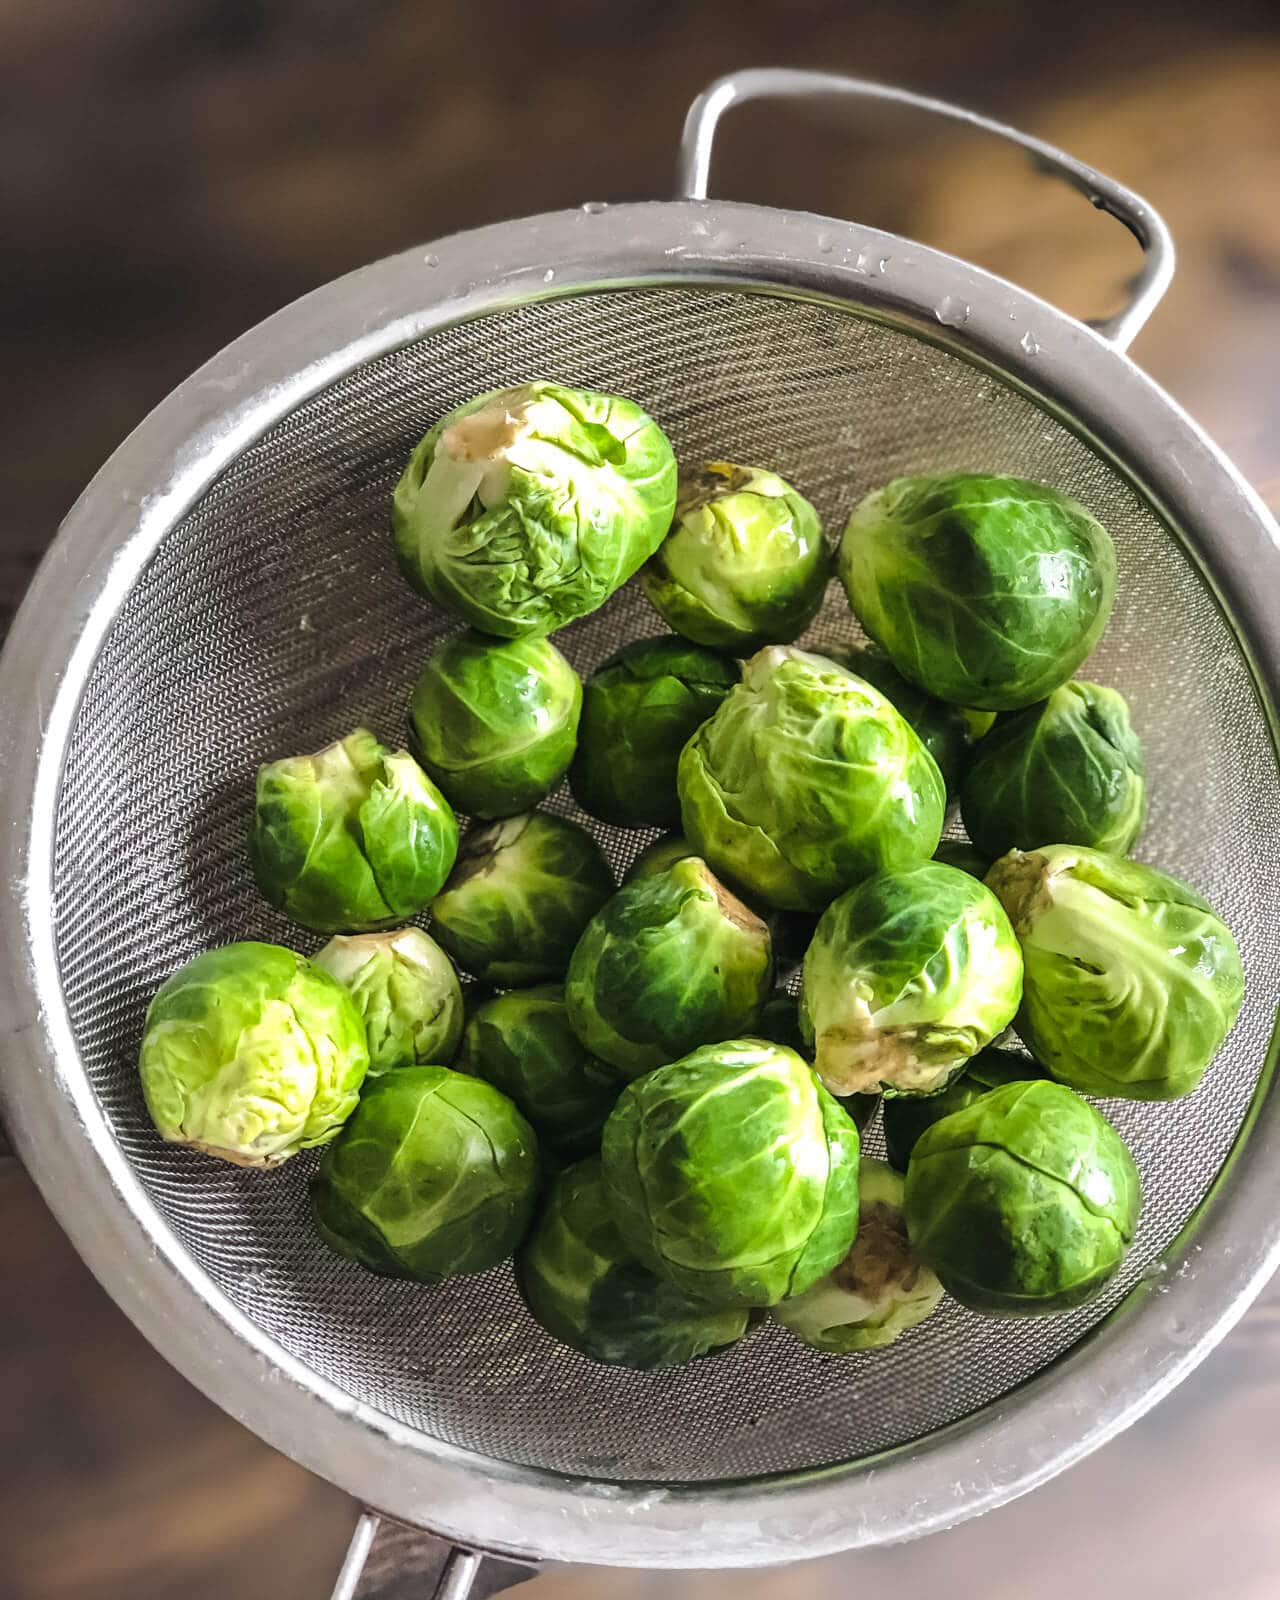 A silver mesh strainer with brussel sprouts over a wooden counter.